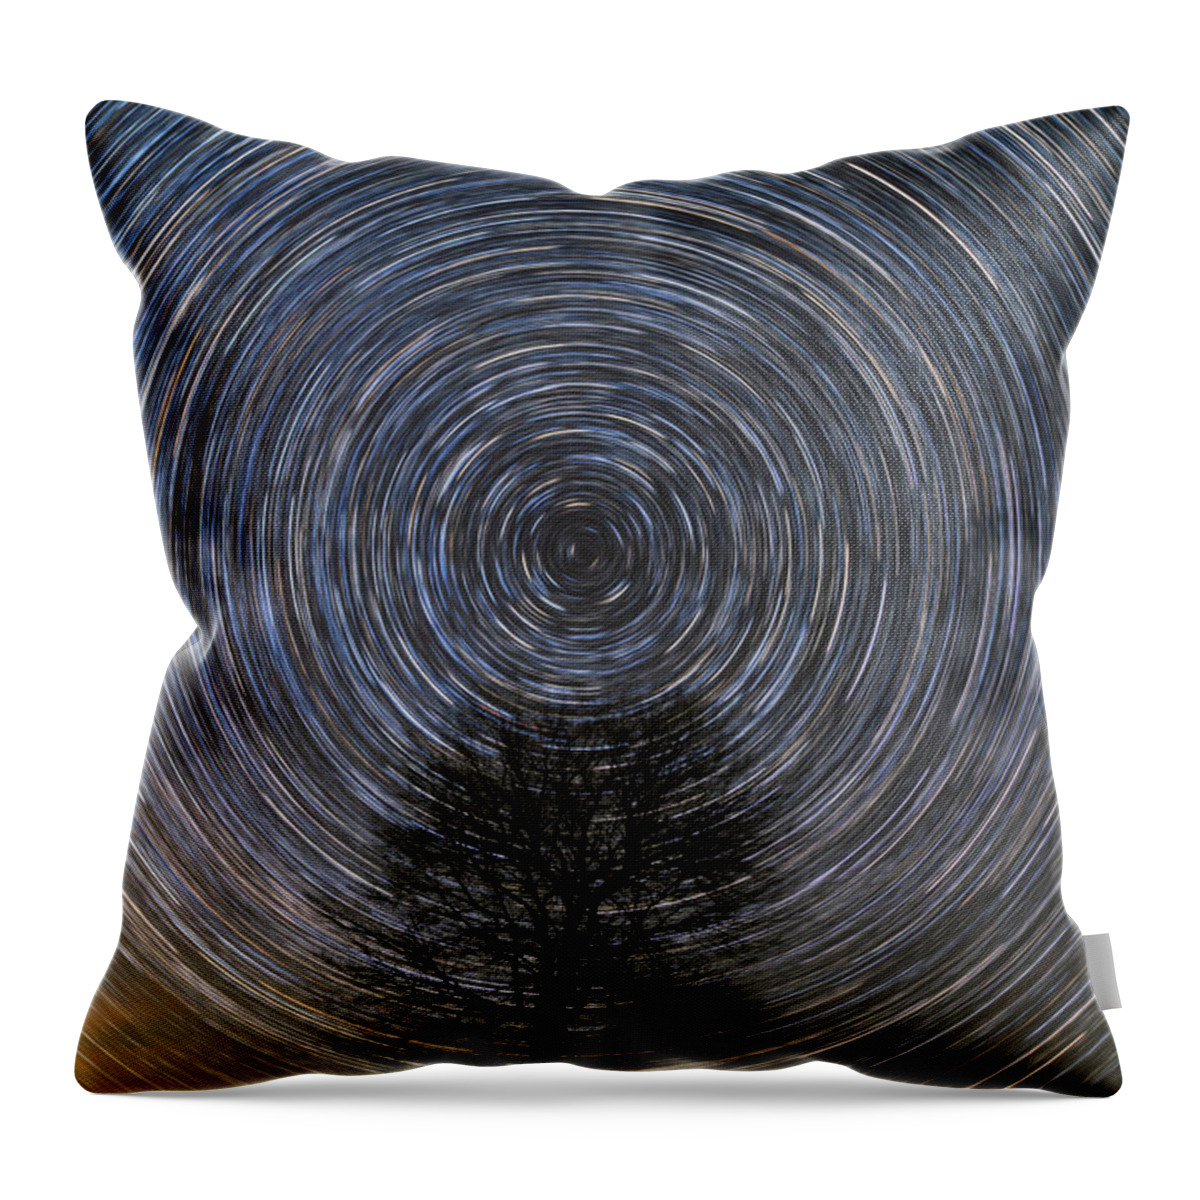 Star Trails Throw Pillow featuring the photograph Tree Topper by Chuck Rasco Photography